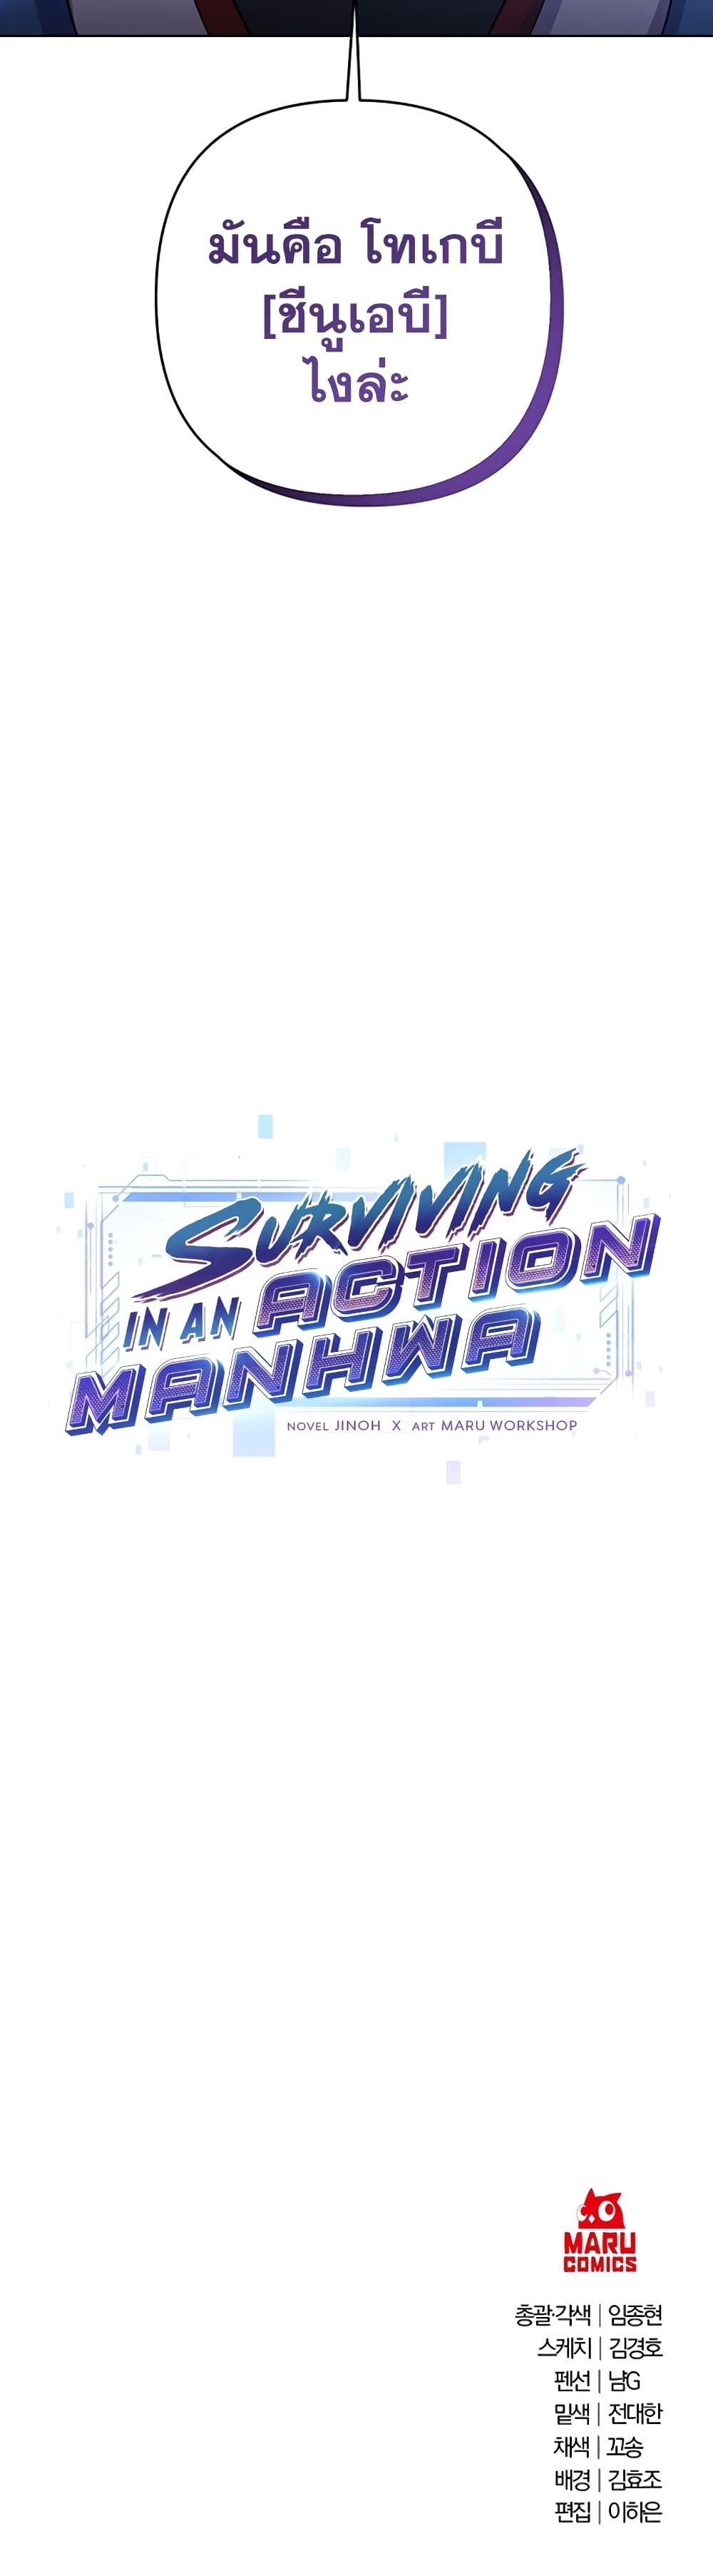 Surviving in an Action Manhwa 18 41